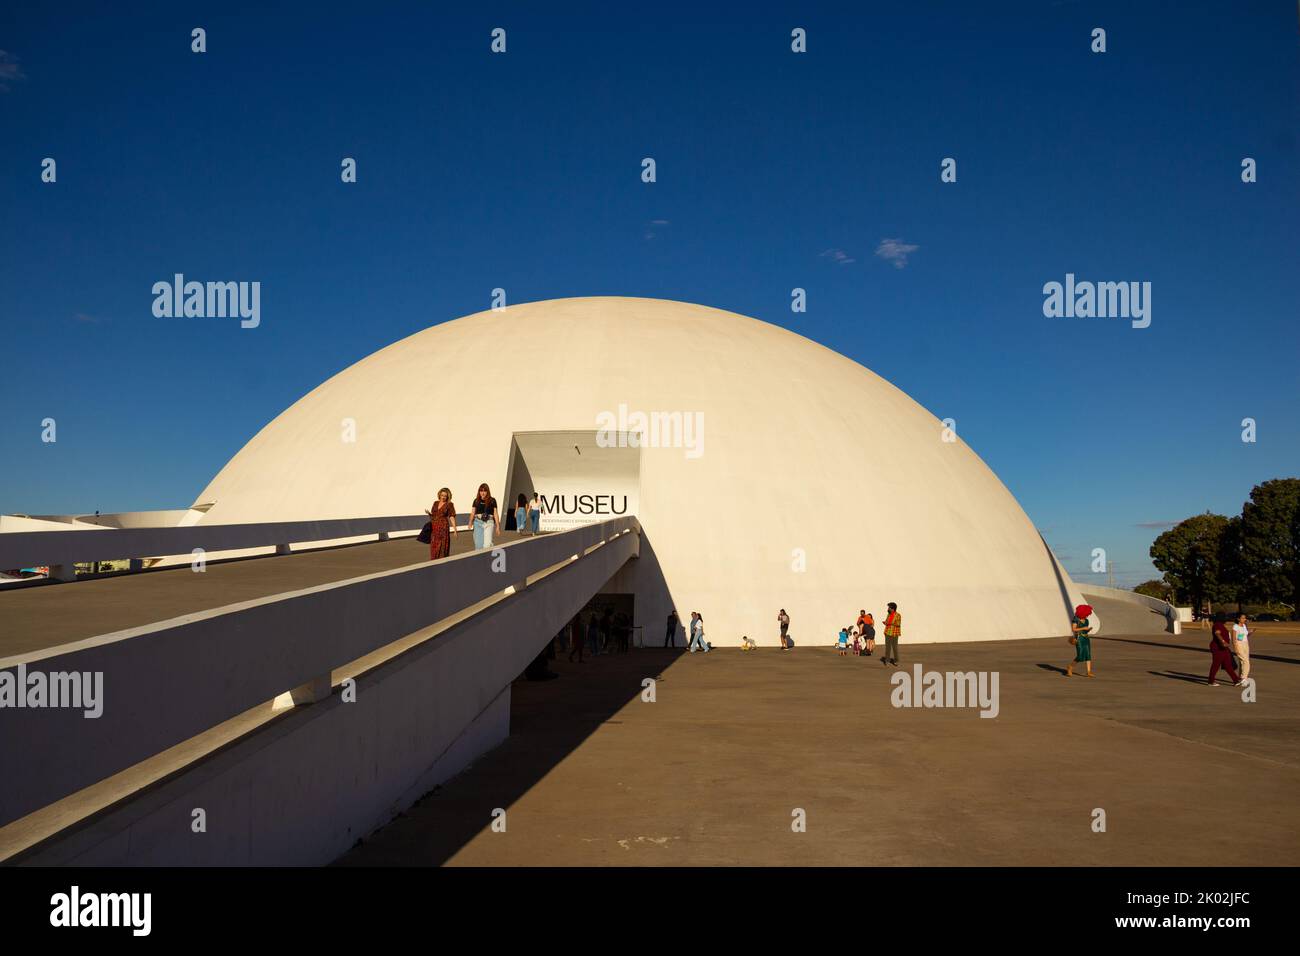 Brasília, Federal District, Brazil – July 23, 2022: National Museum of the Republic with some people on the ramp, on a clear day with blue sky. Stock Photo